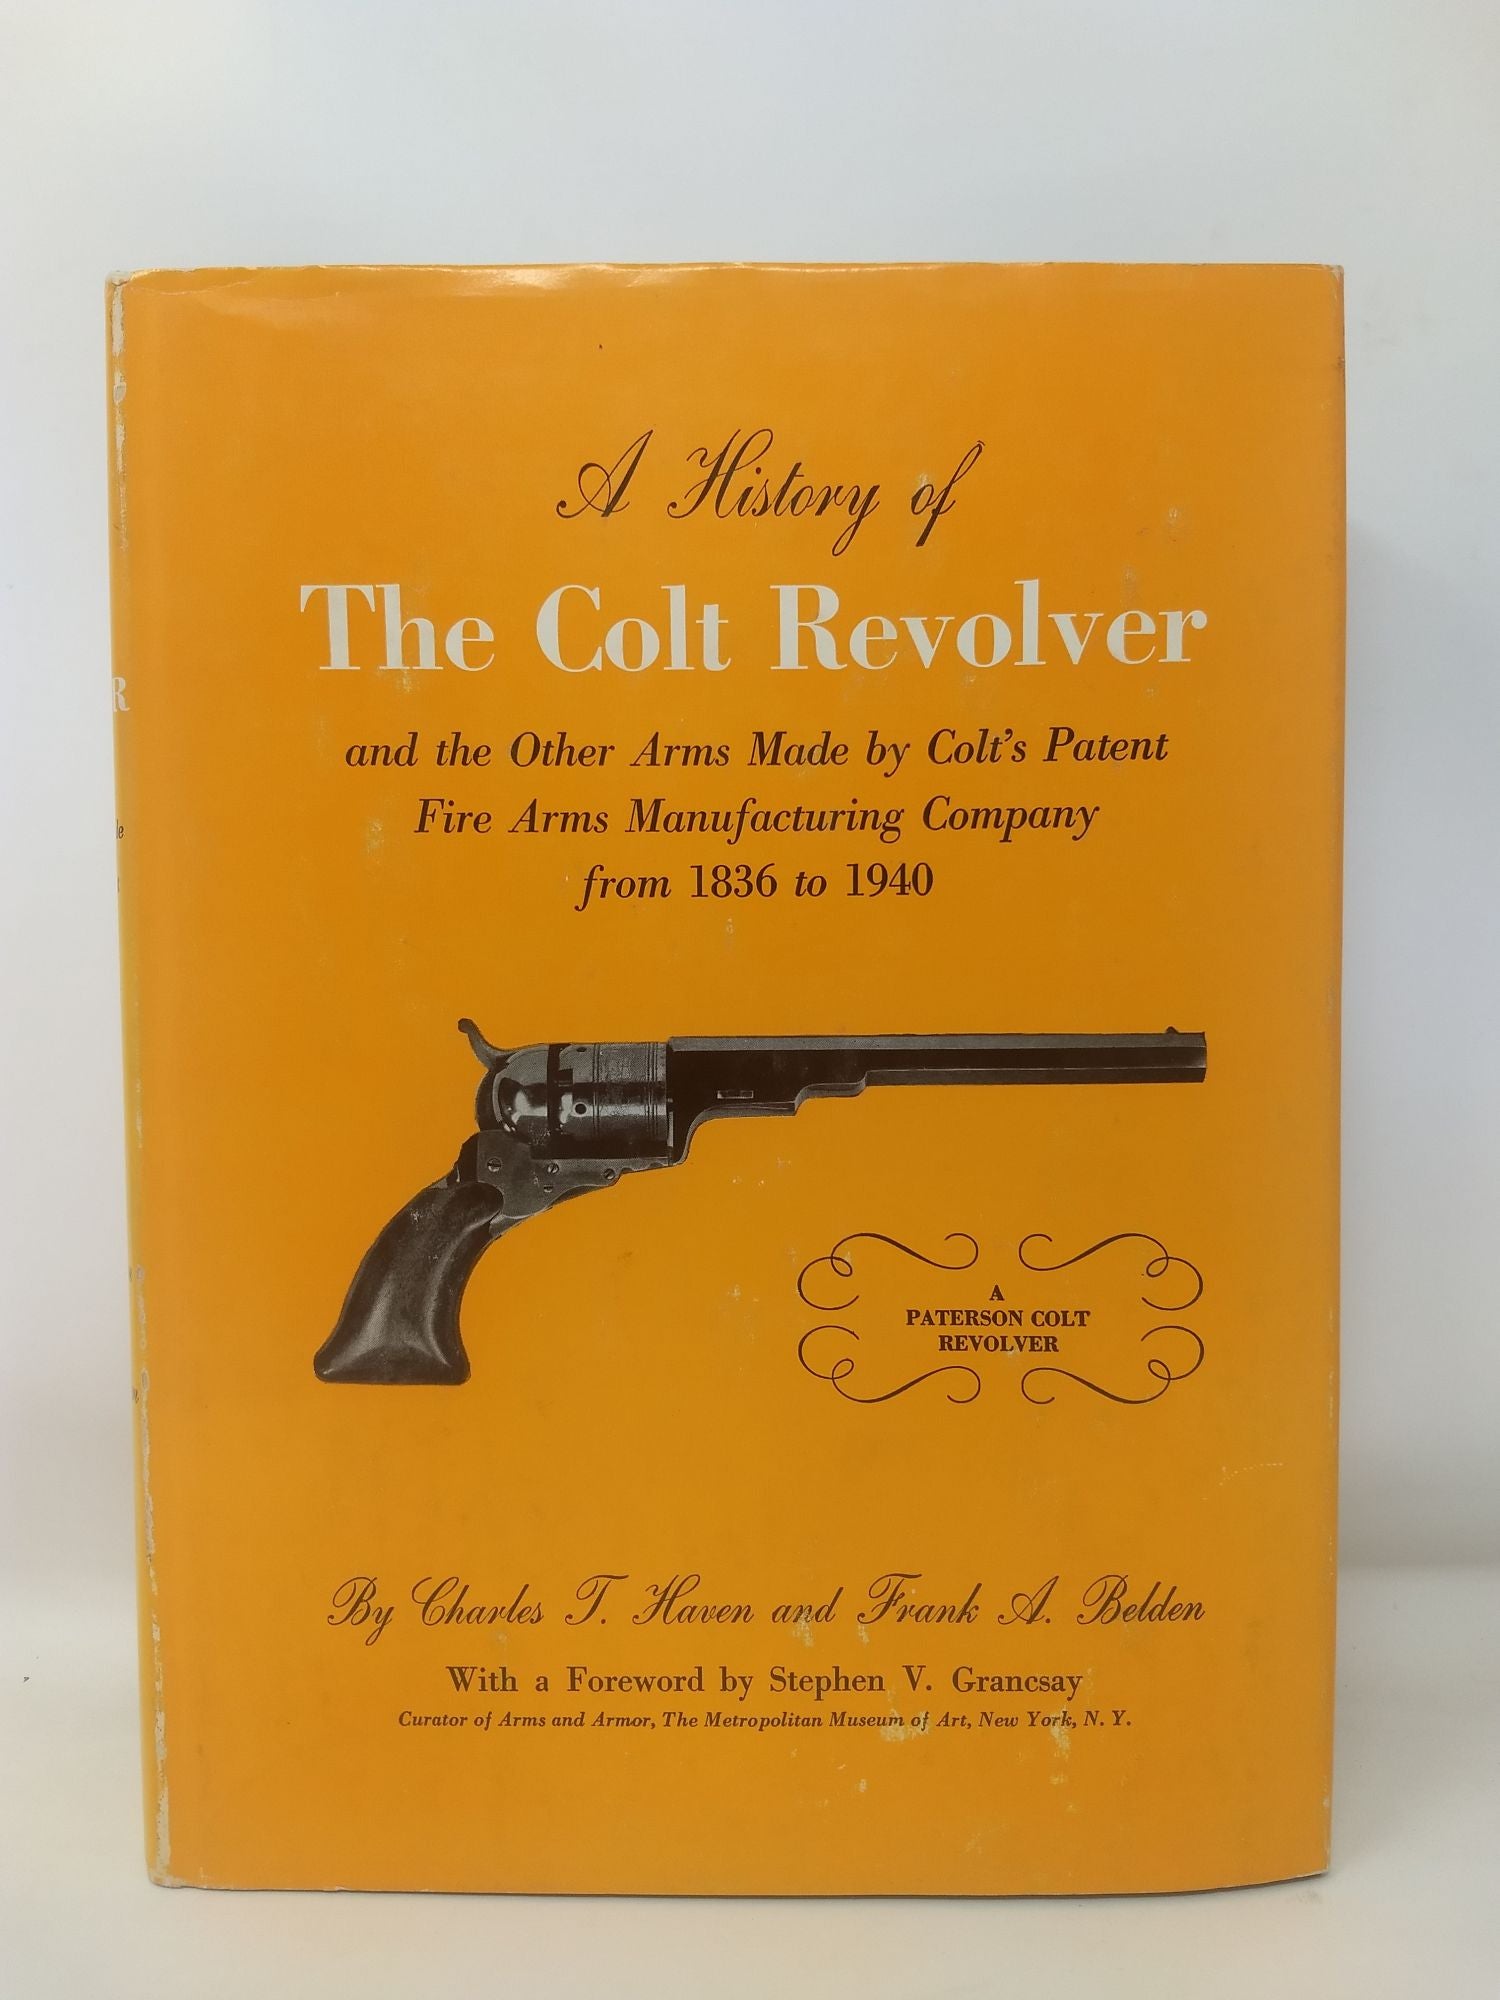 Haven, Charles T. and Frank A. Belden - A History of the Colt Revolver and the Other Arms Made by Colt's Patent Fire Arms Manufacturing Company from 1836 to 1940